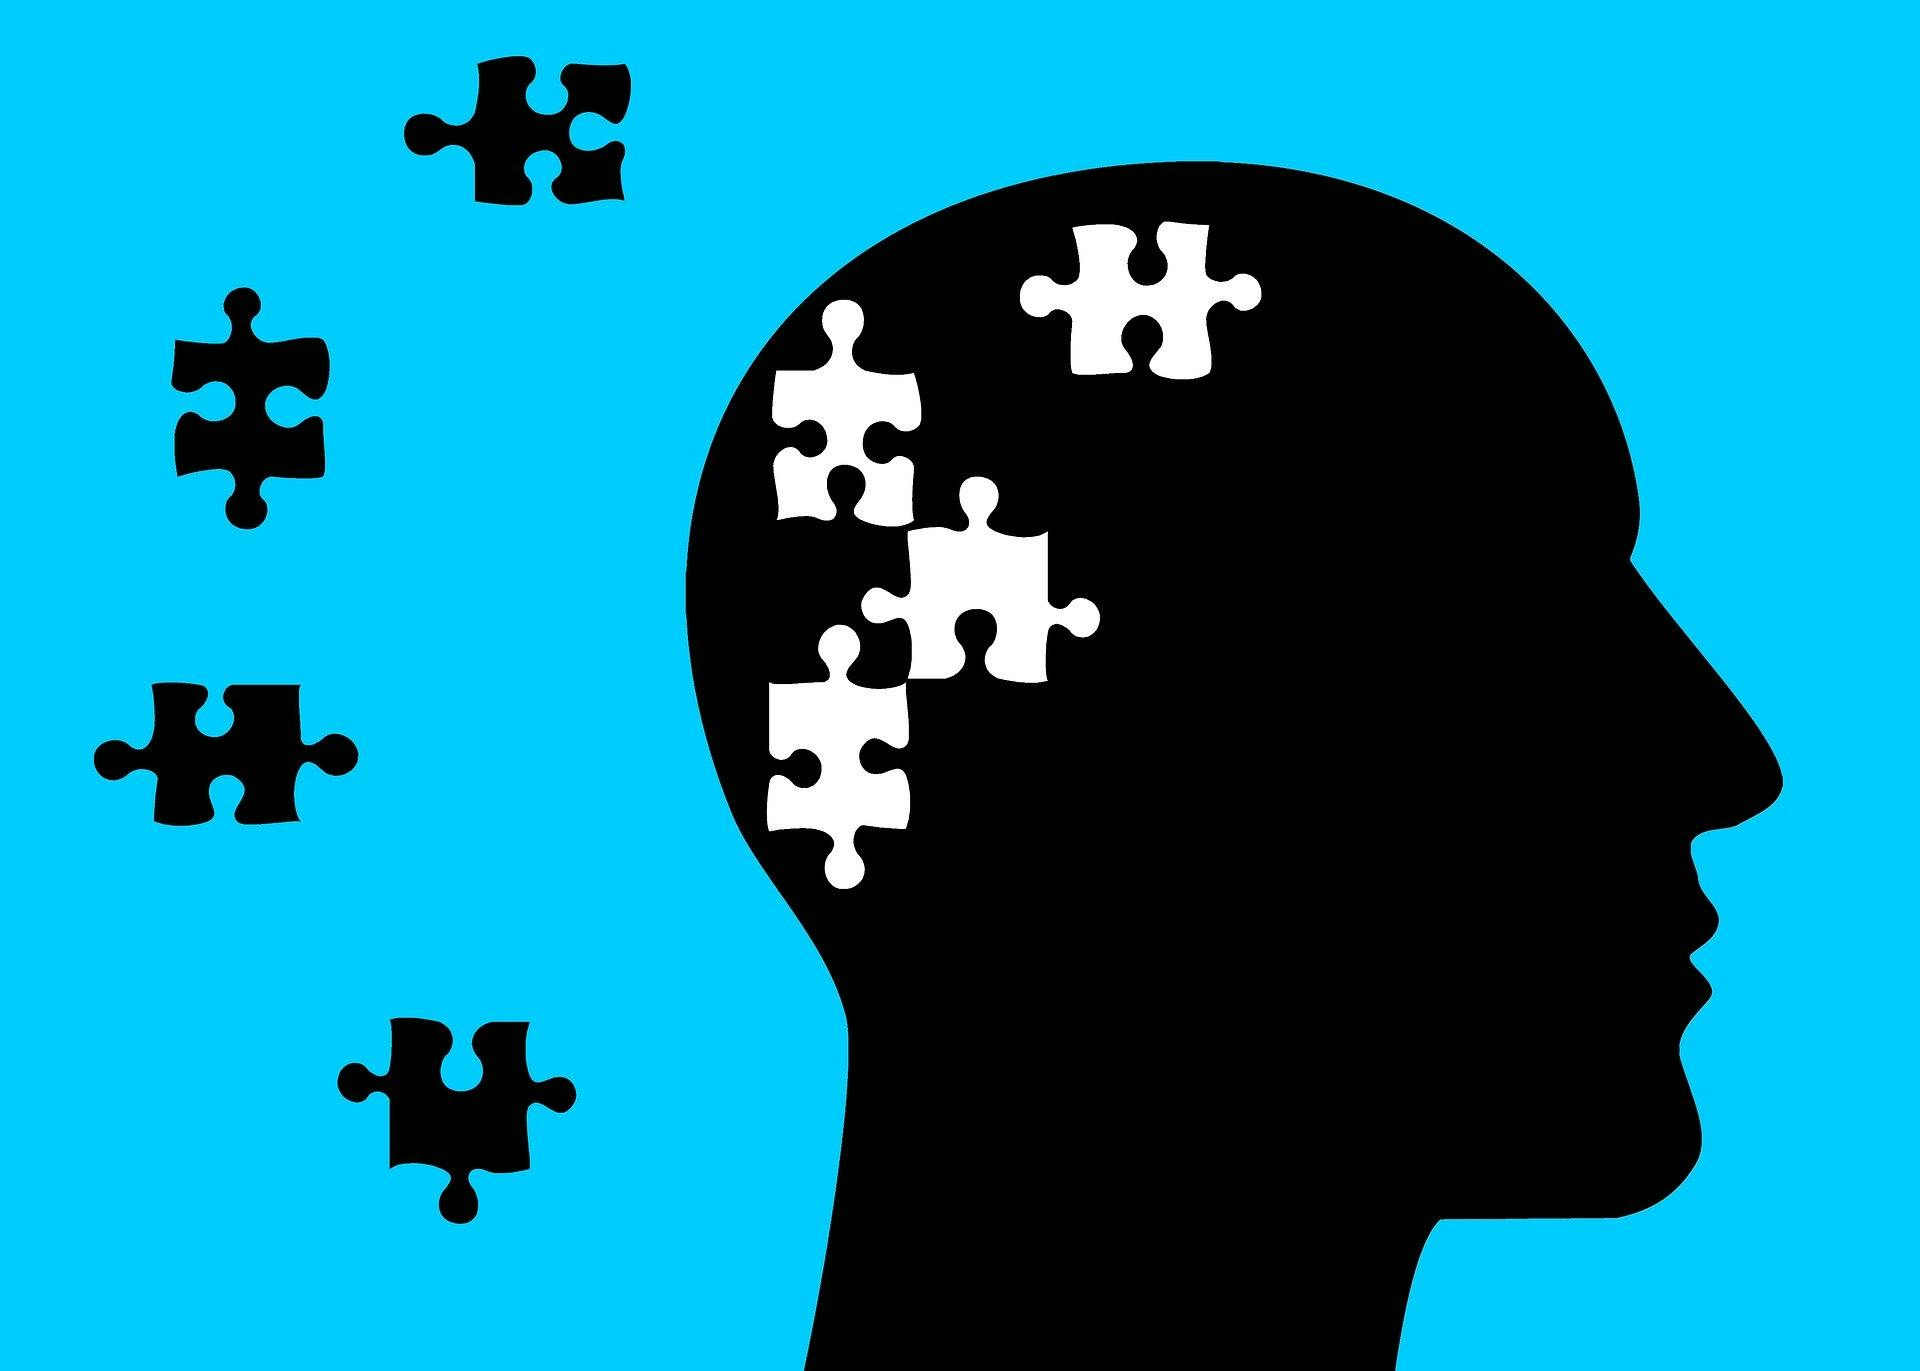 Illustration: A silhouette of a face with puzzle pieces in the brain and floating outside of the head